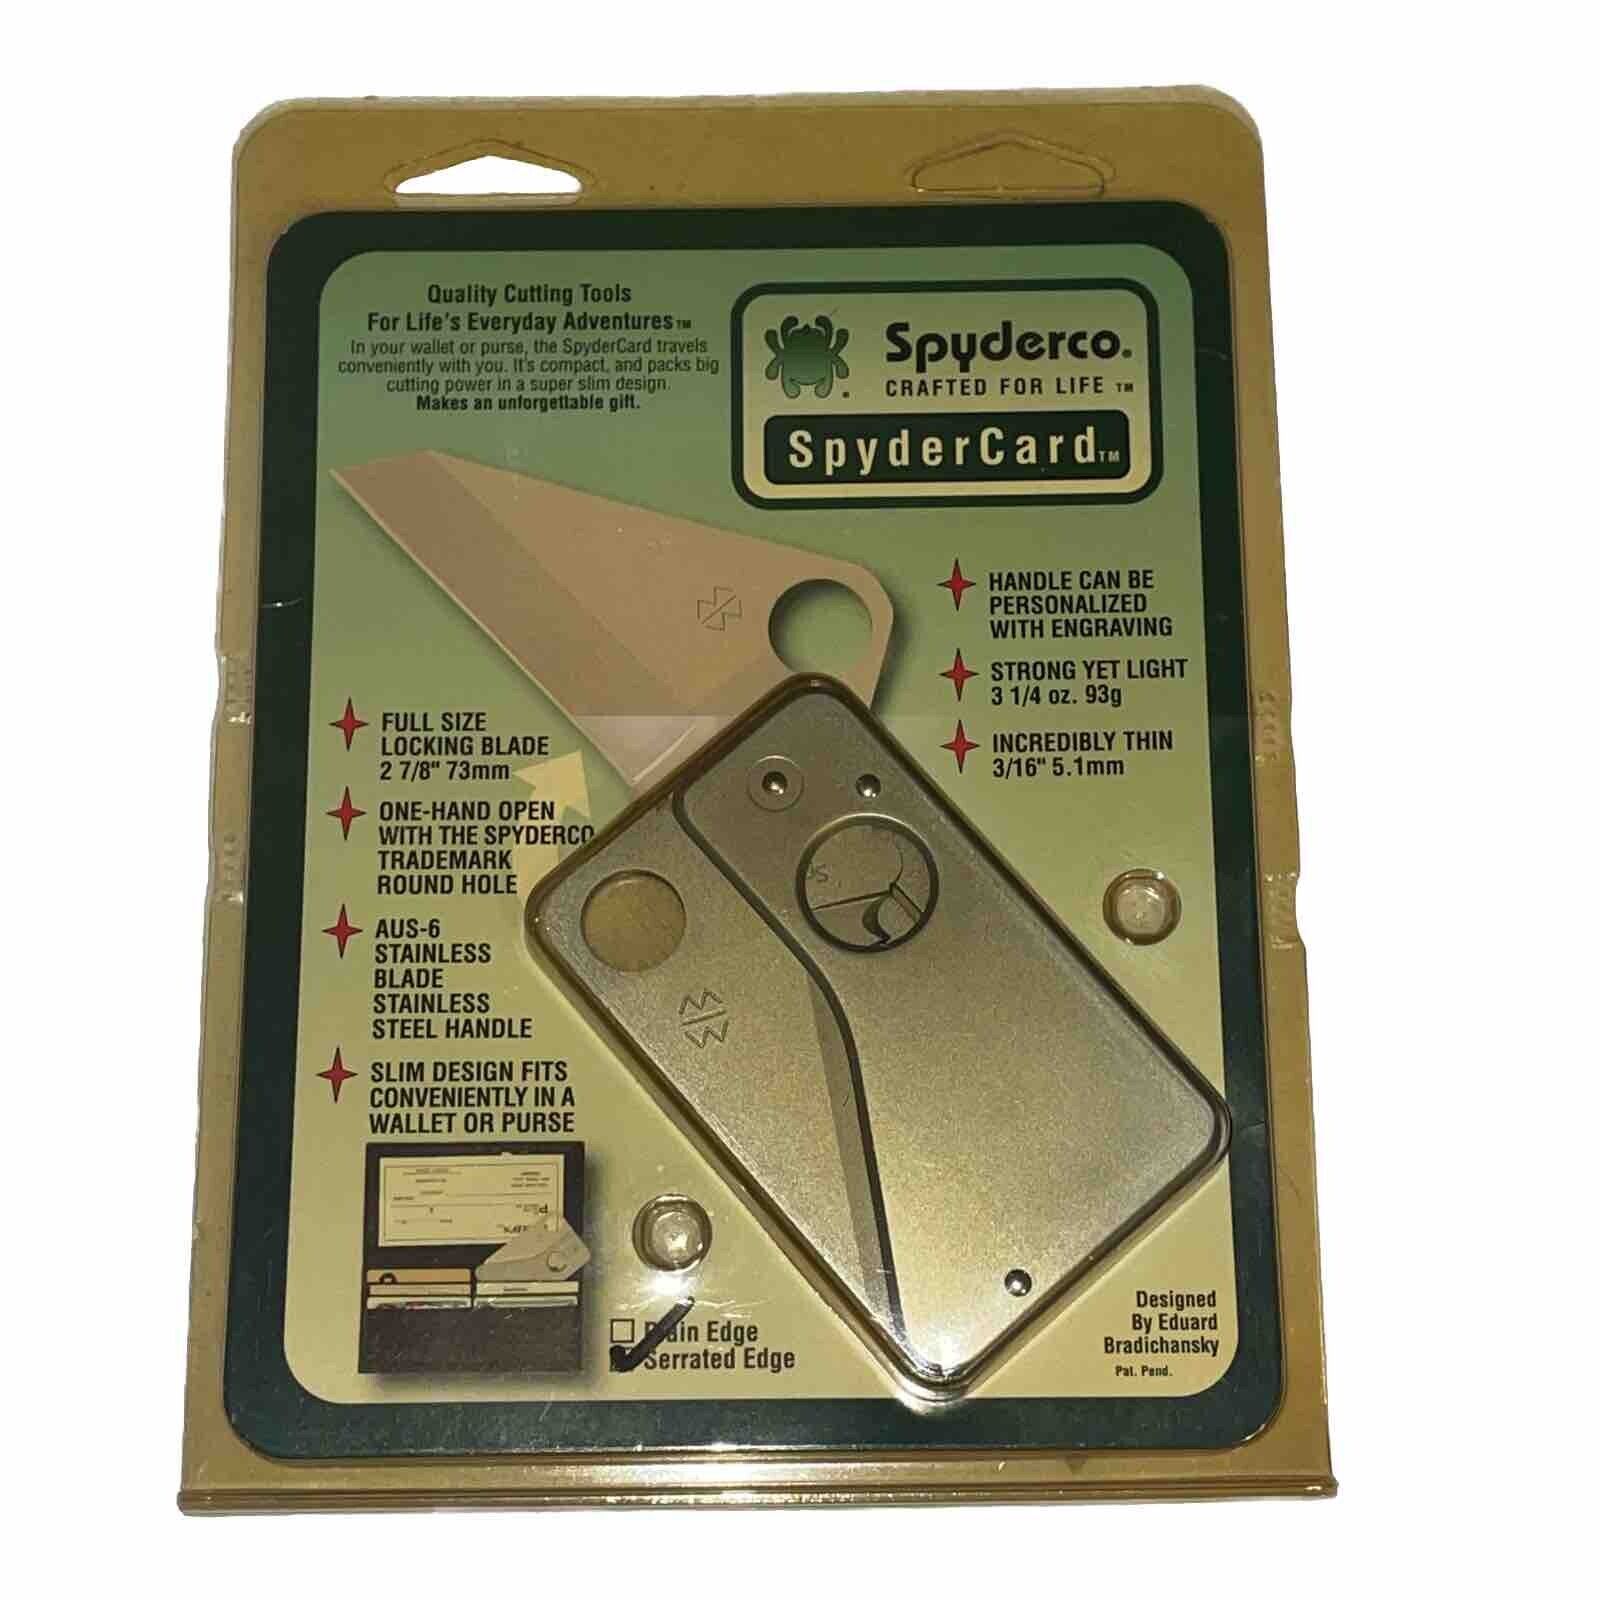 Spyderco SpyderCard Knife - Credit Card Serrated Edge - New In Blister Pack